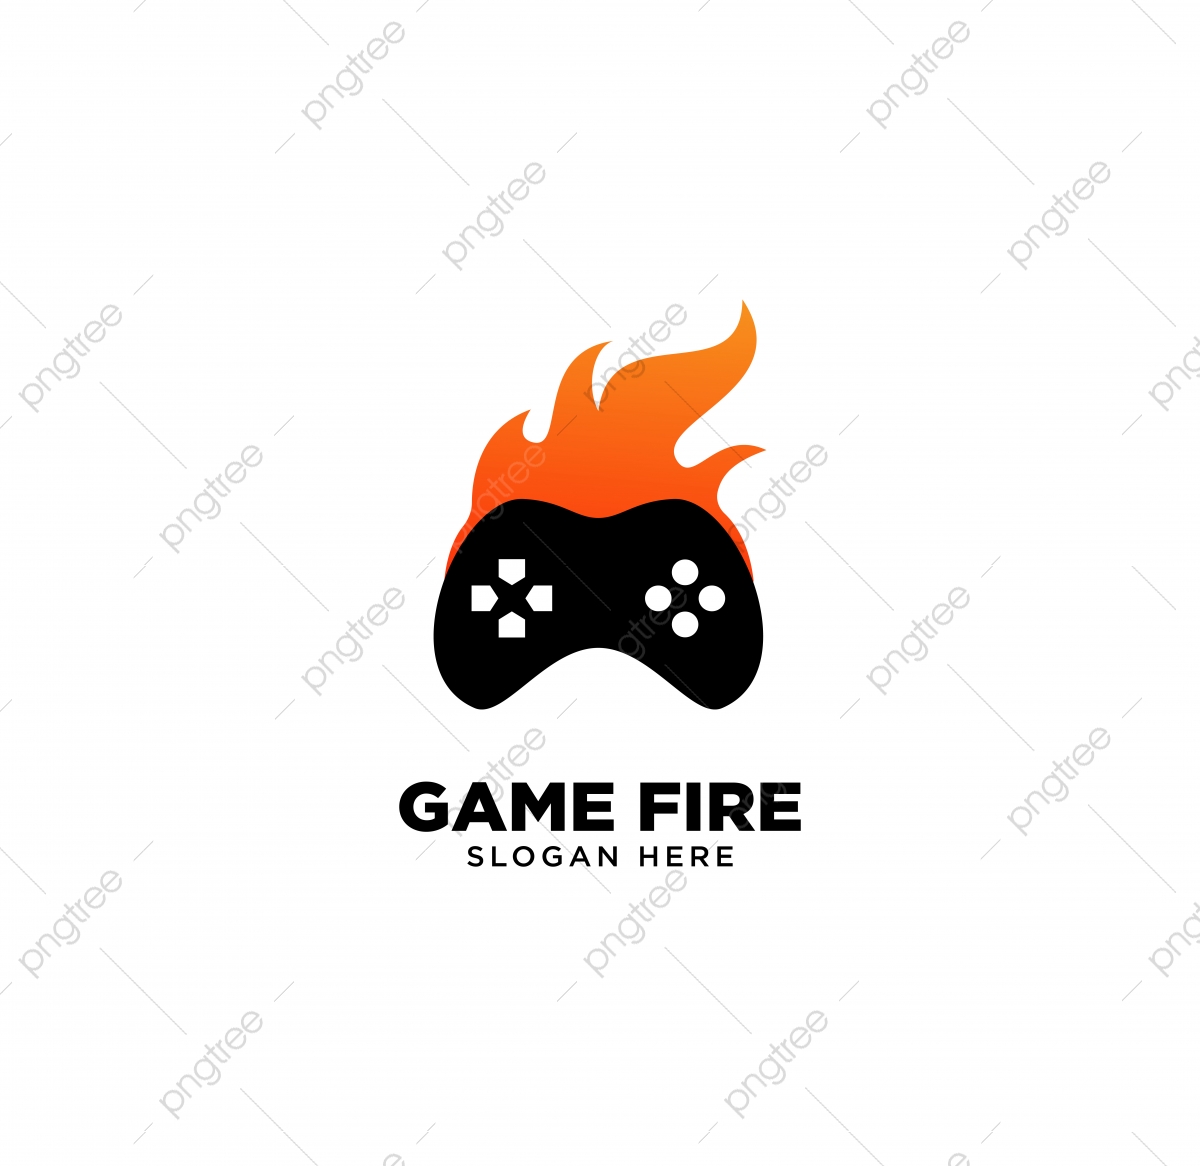 Free Fire Gaming Logo Hd Wallpapers